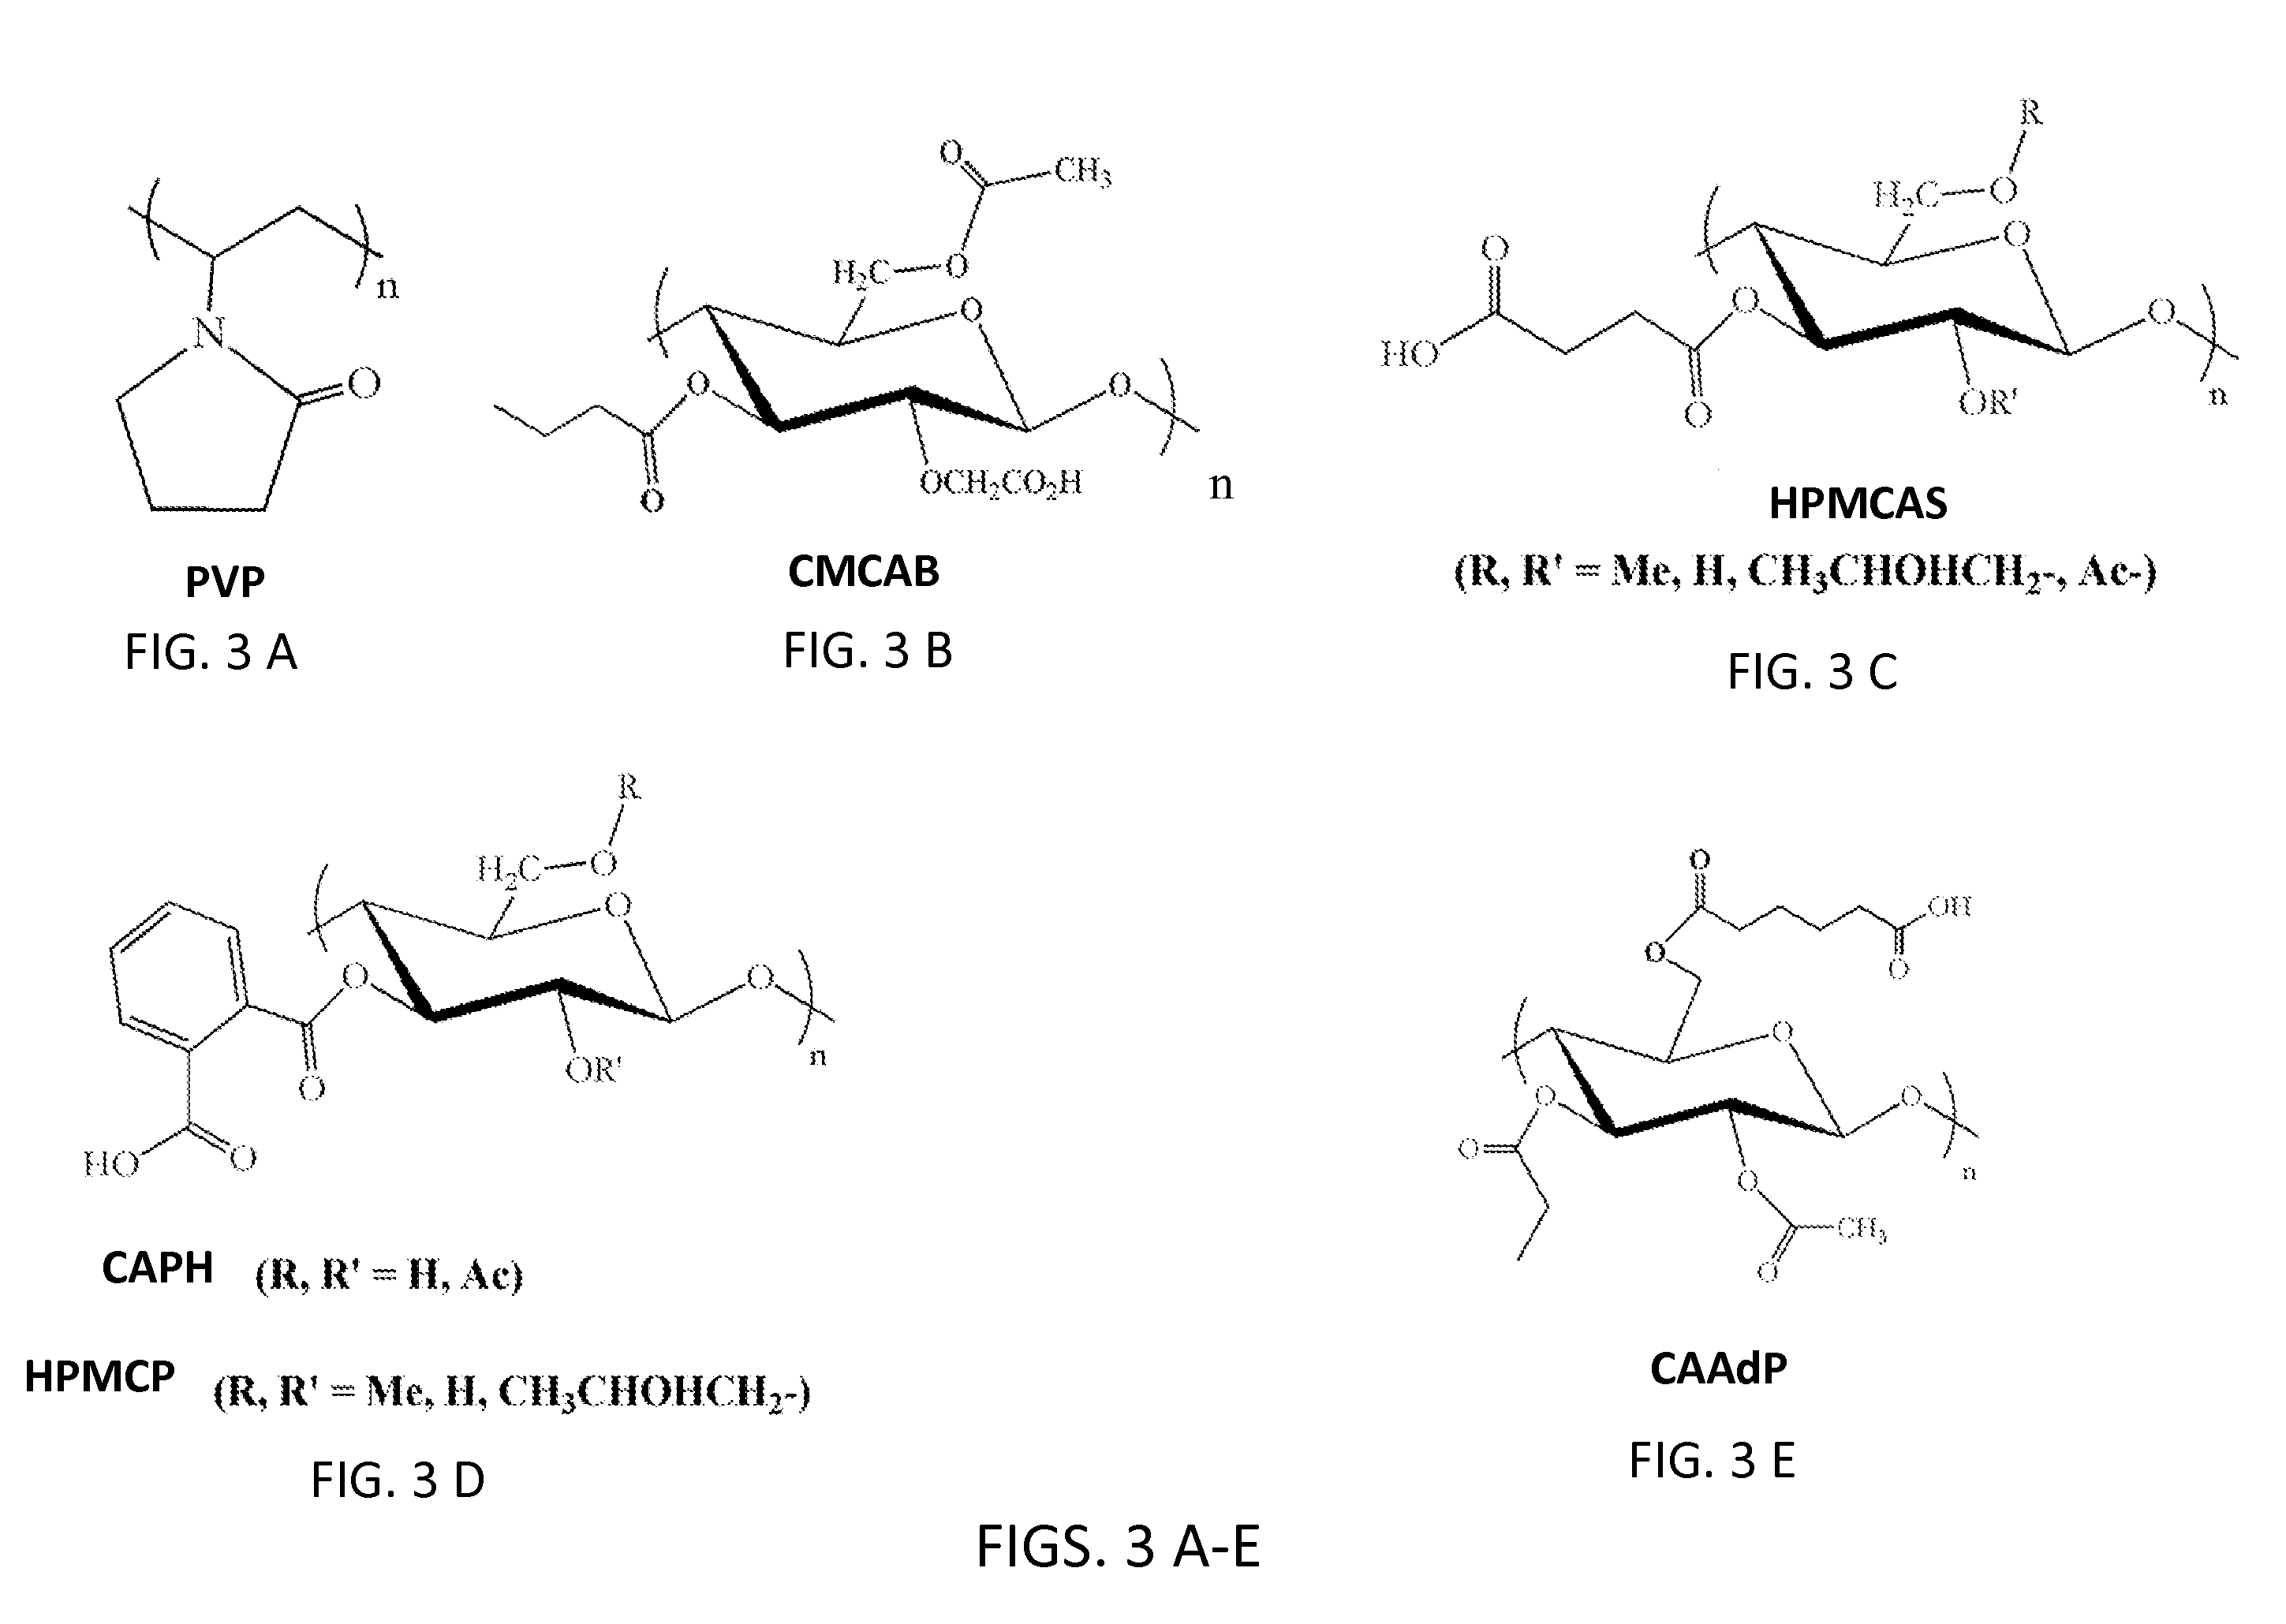 Cellulose derivatives for enhancing bioavailability of flavonoids